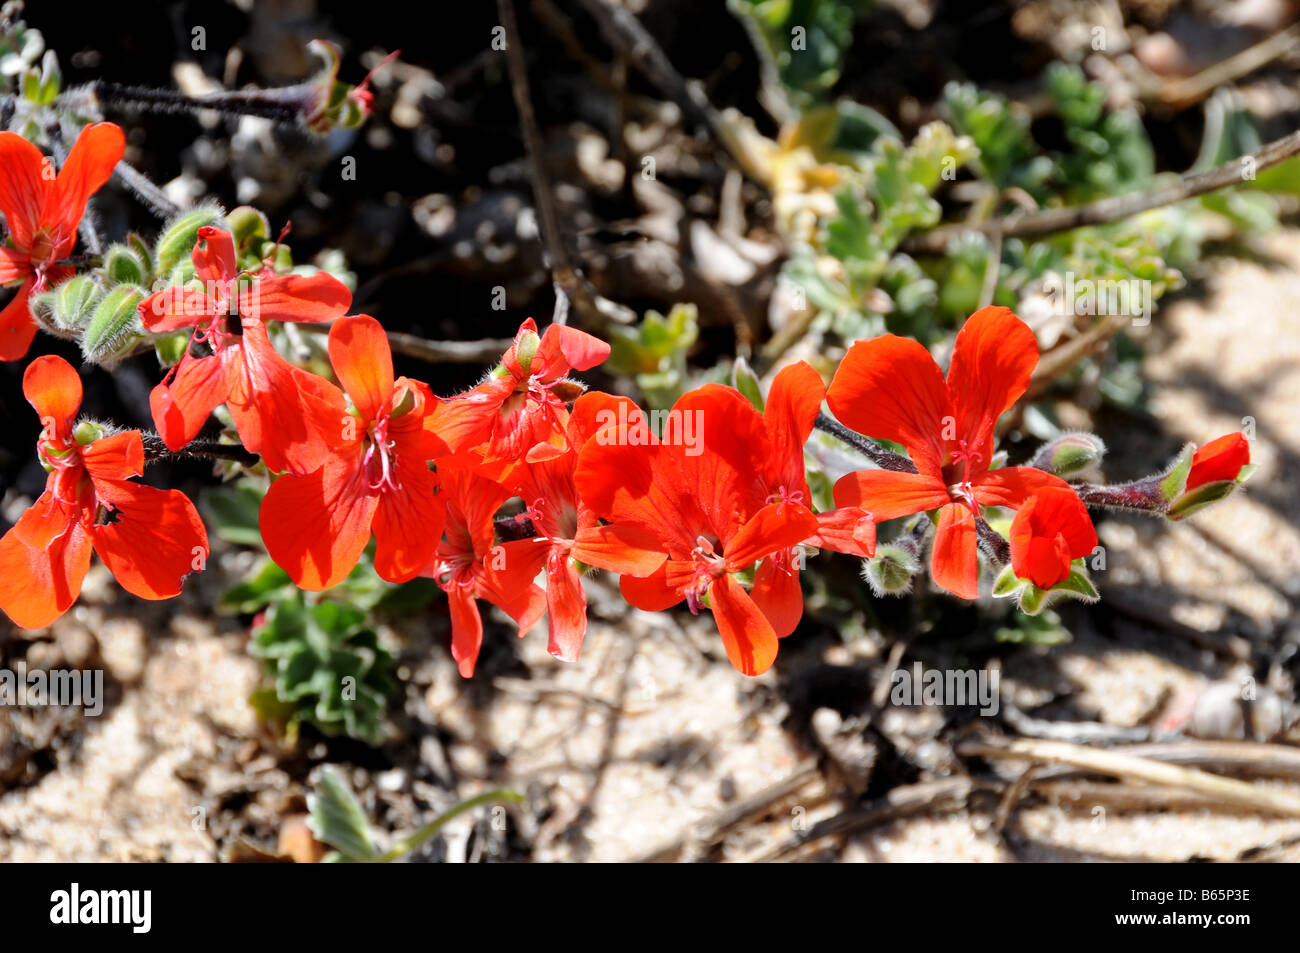 Scarlet Pelargonium flowers from the West Coast, South Africa Stock Photo